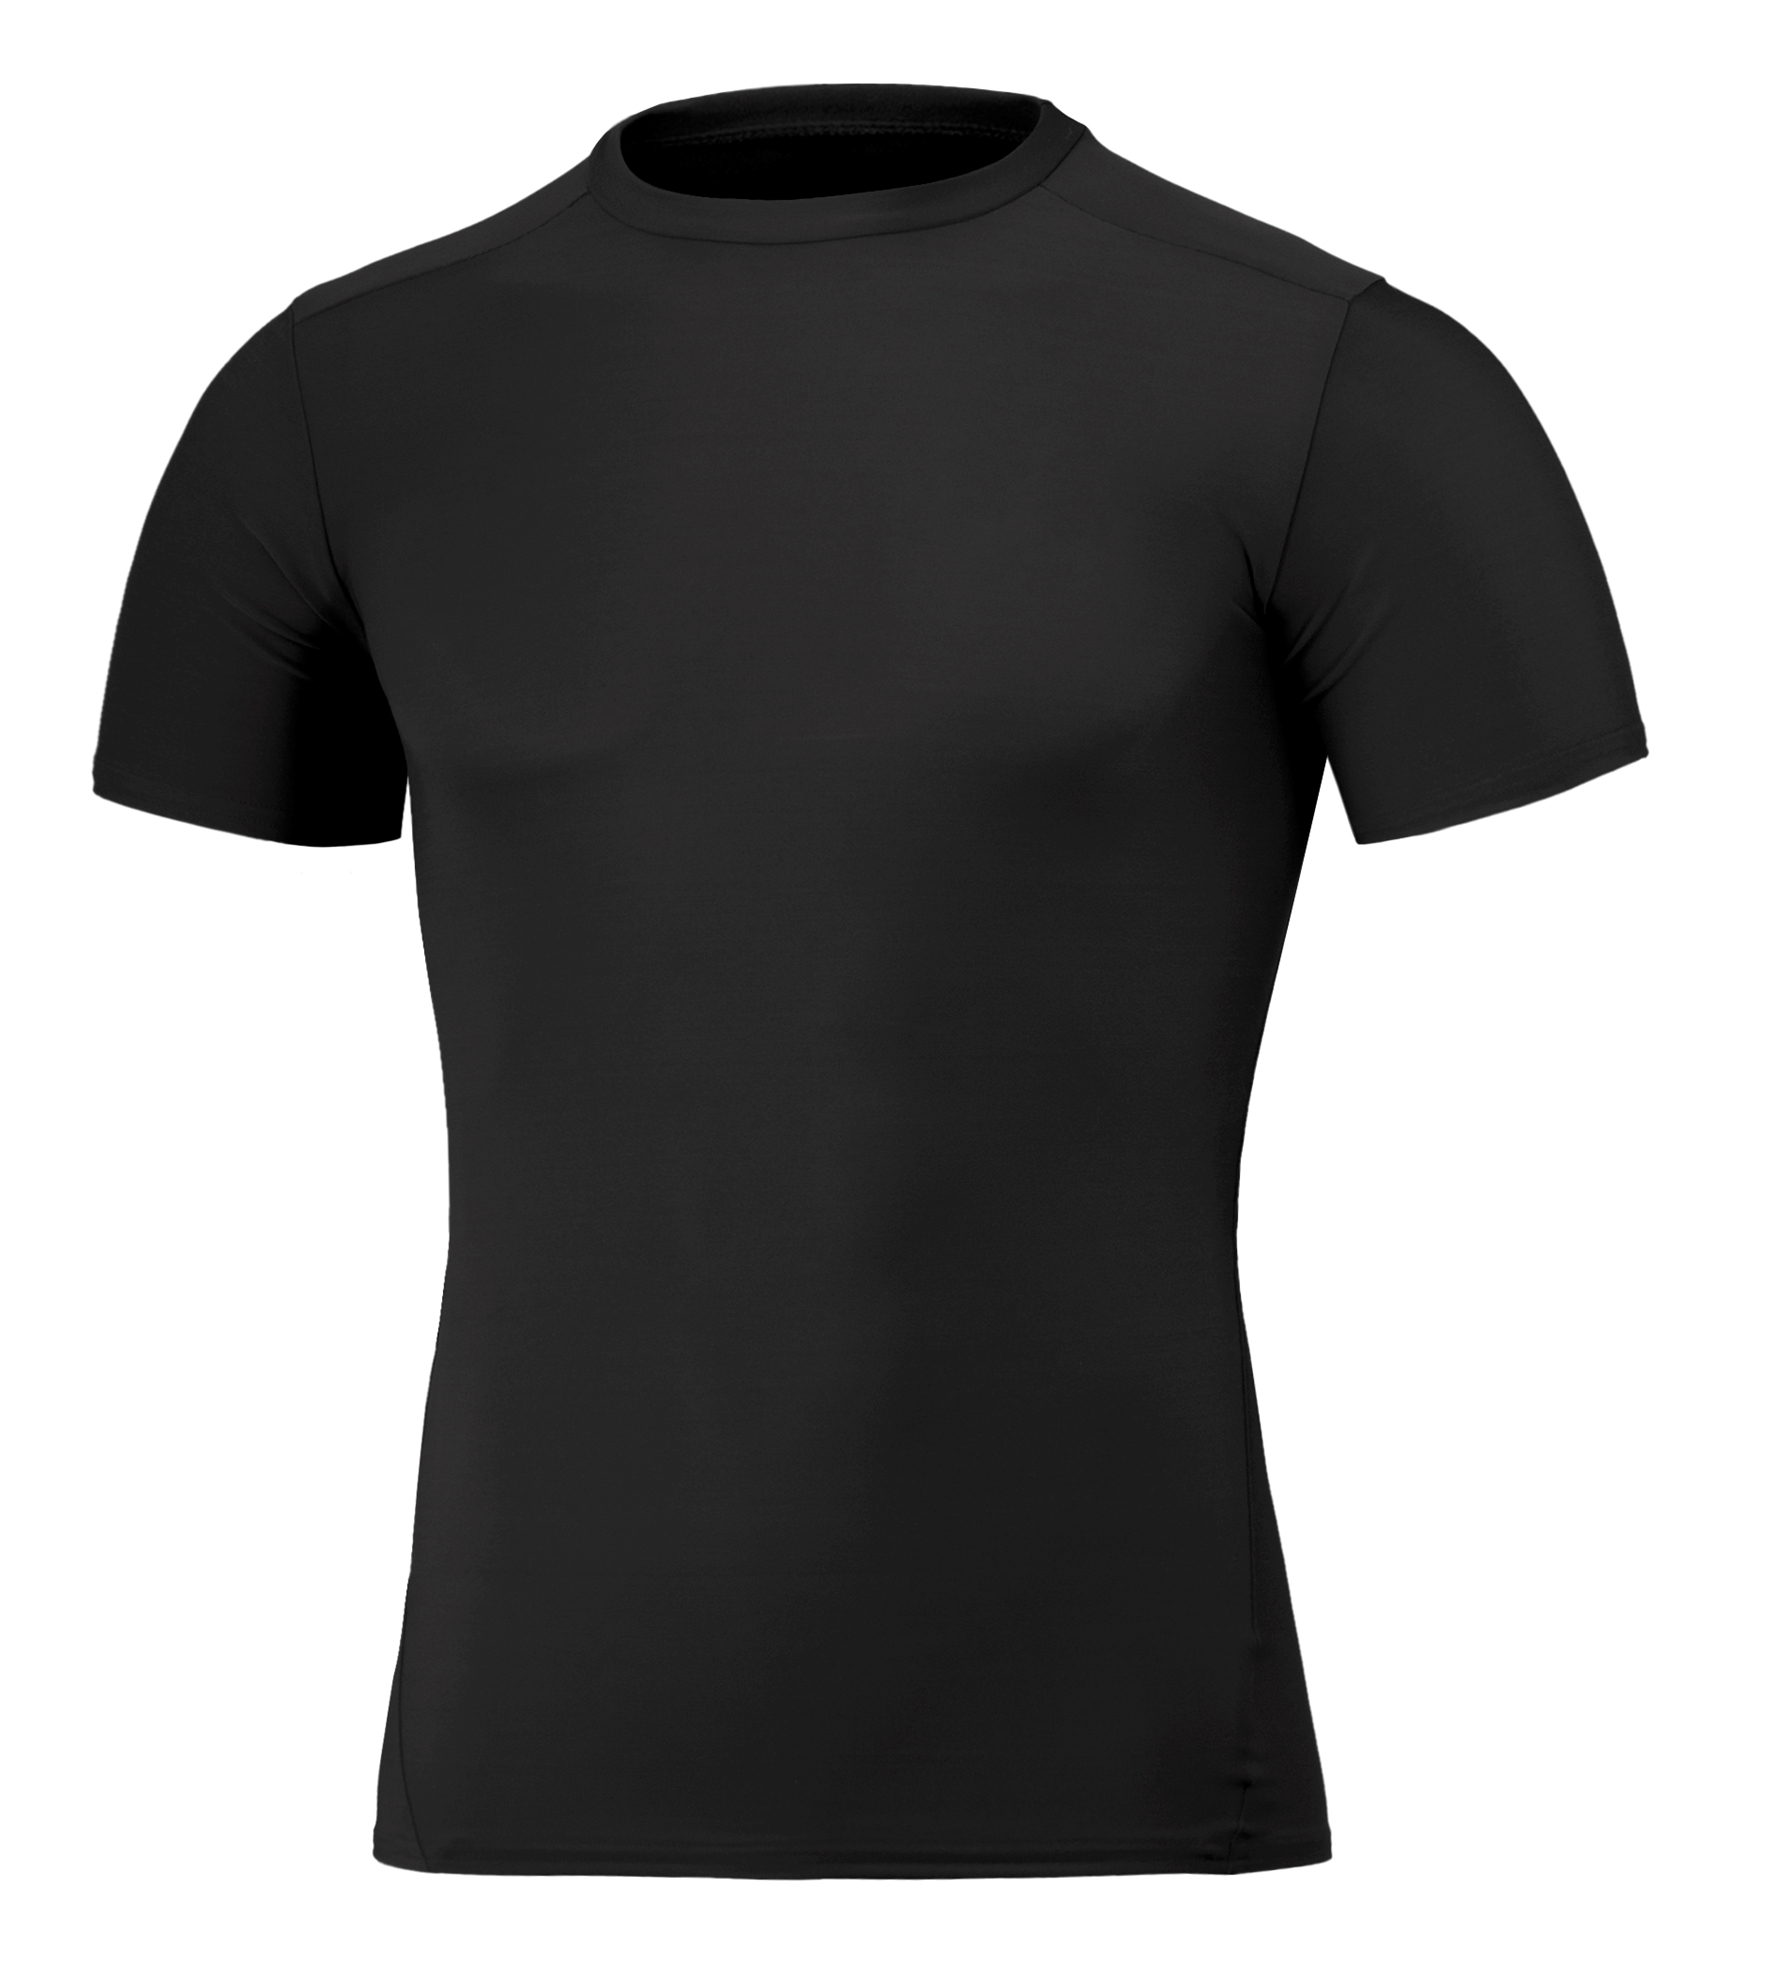 BAW Athletic Wear CT101 - Men's Compression Short Sleeve T-Shirt